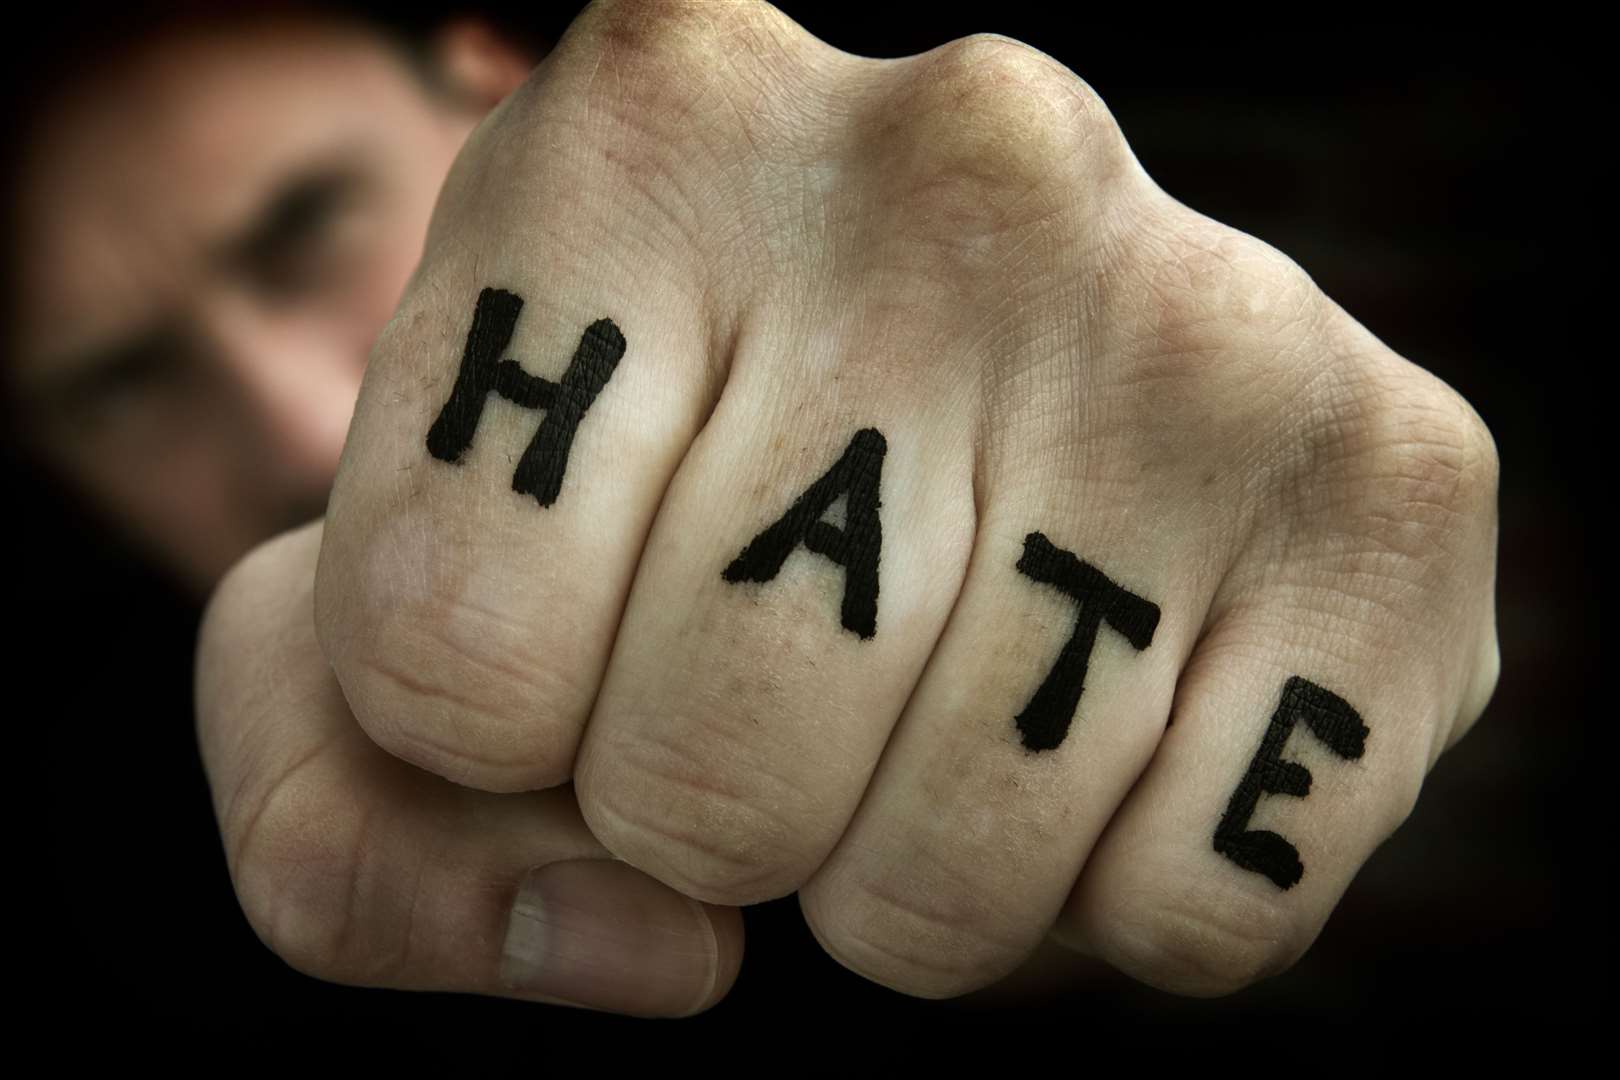 The number of cases of hate crime taken to court has risen from 346 to 361 between 2017/18 to 2018/19